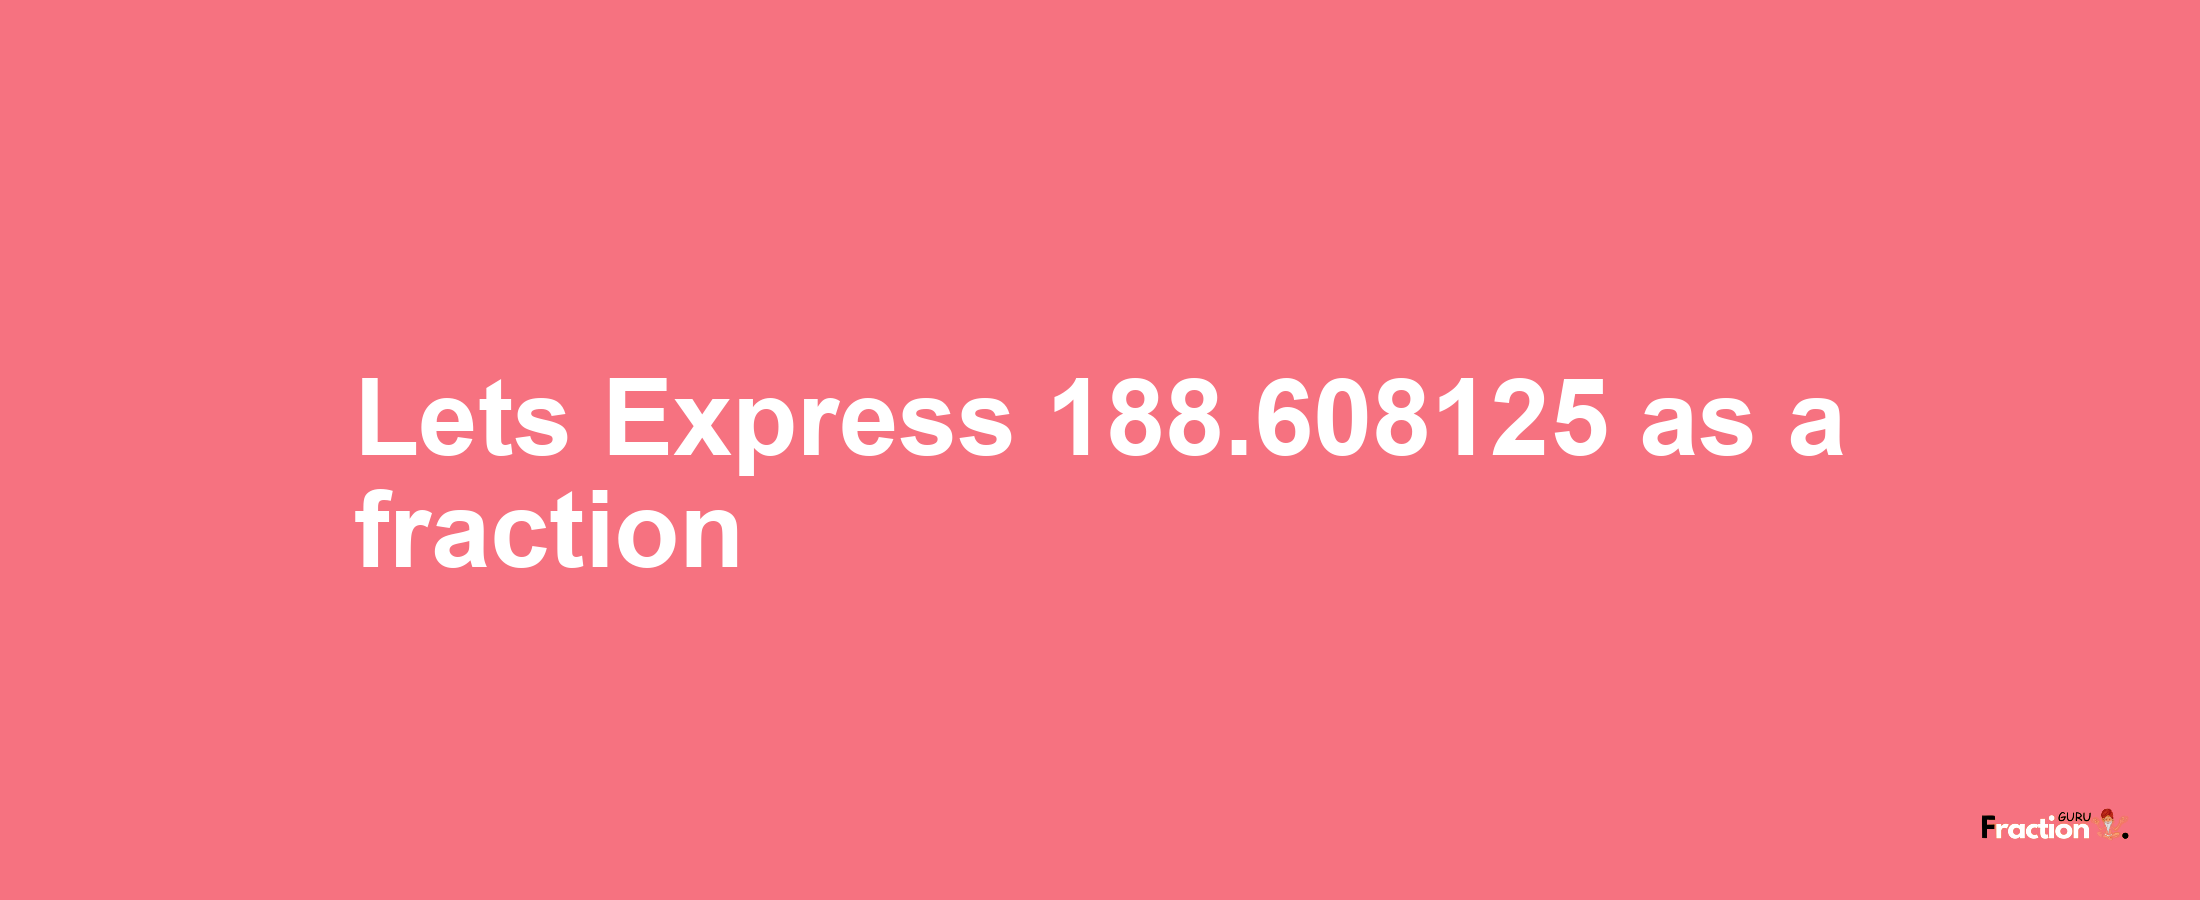 Lets Express 188.608125 as afraction